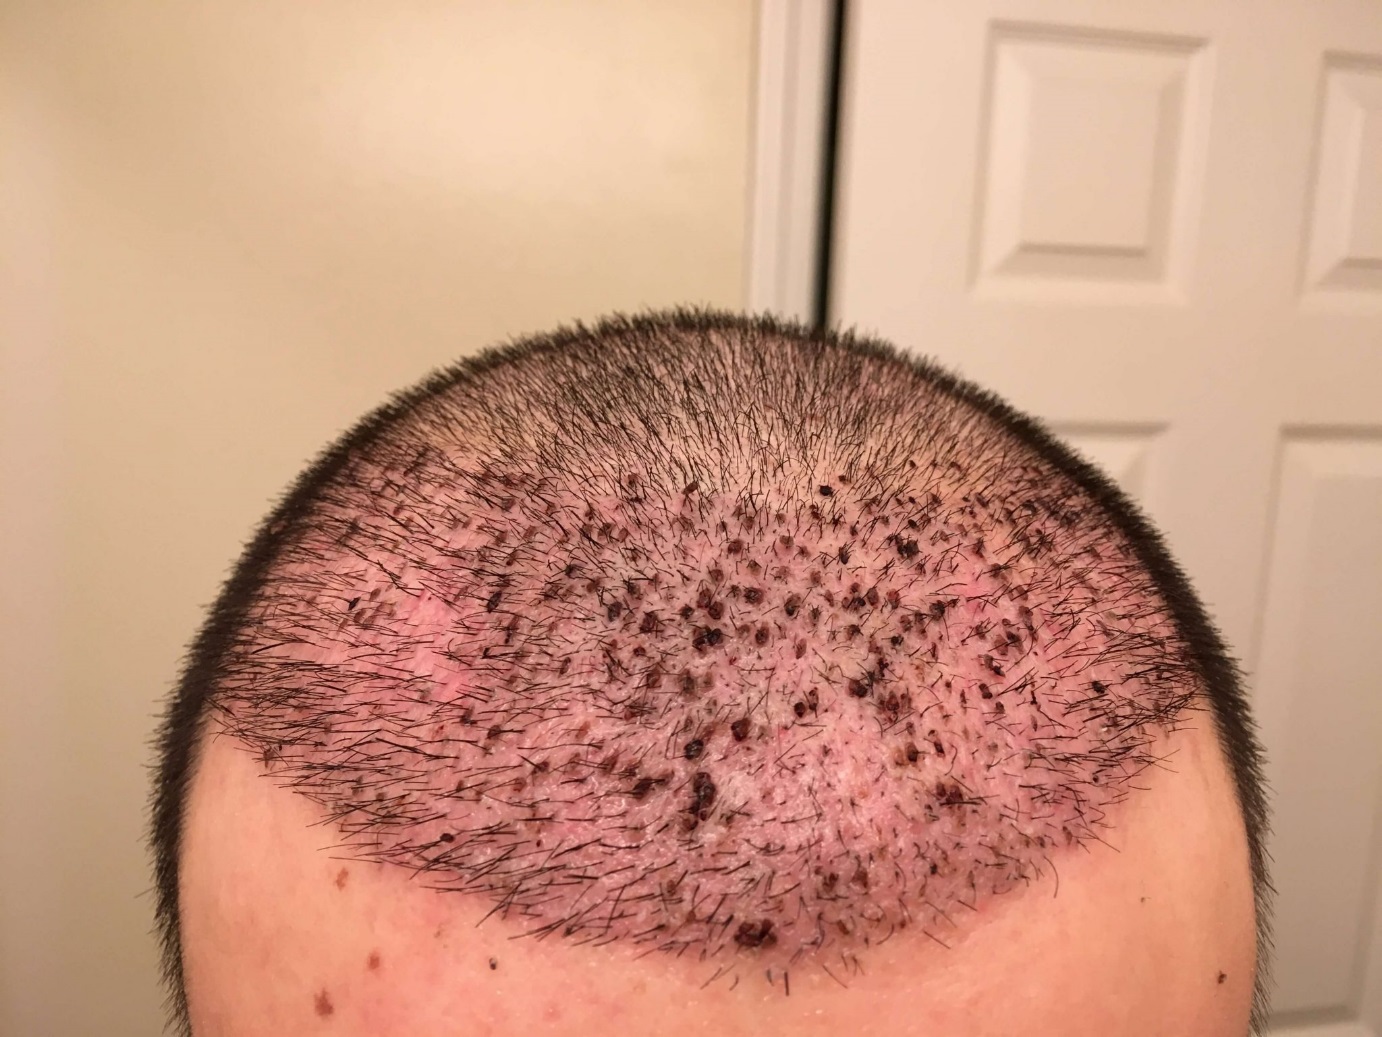 scabbing after hair transplant